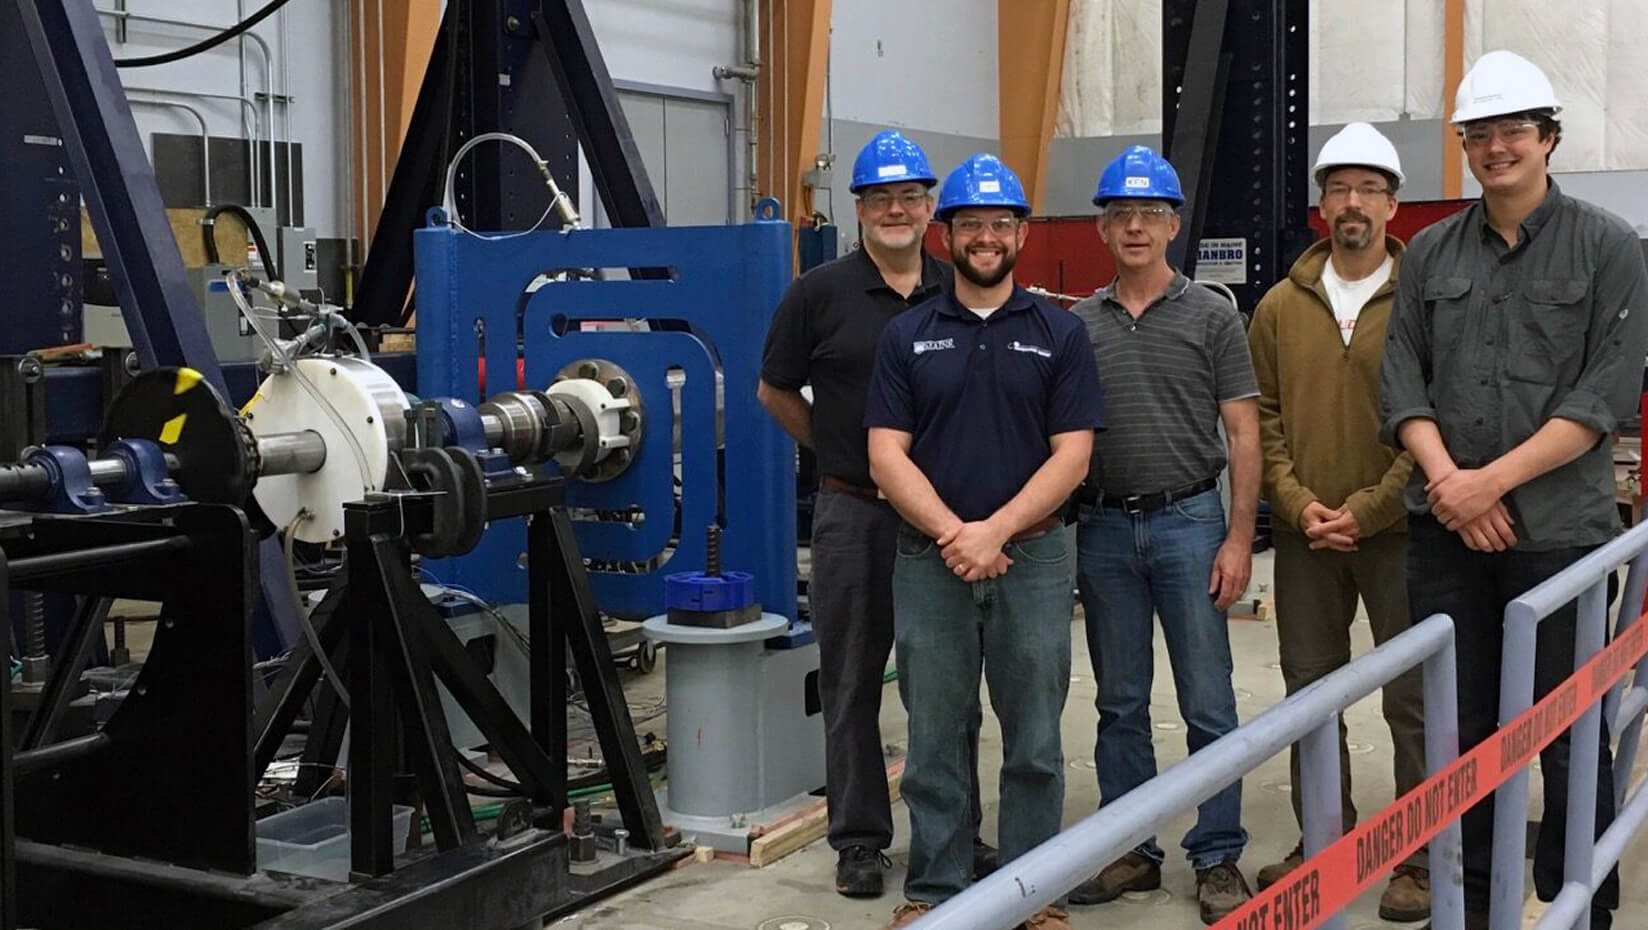 ORPC and UMaine staff members standing nexts to tidal energy technology